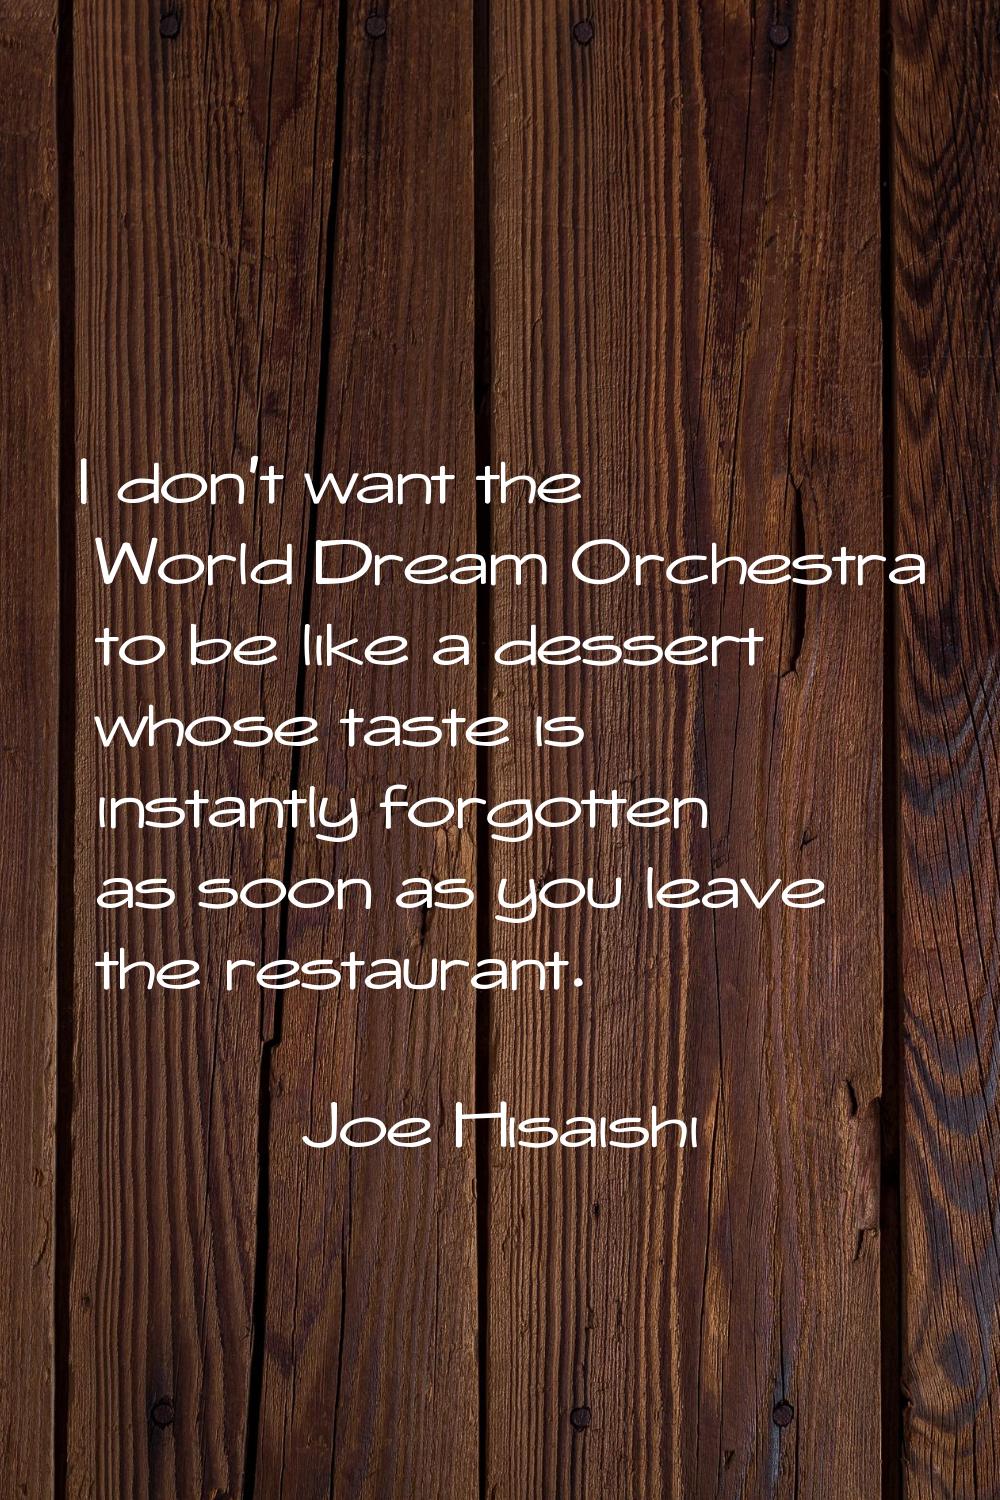 I don't want the World Dream Orchestra to be like a dessert whose taste is instantly forgotten as s